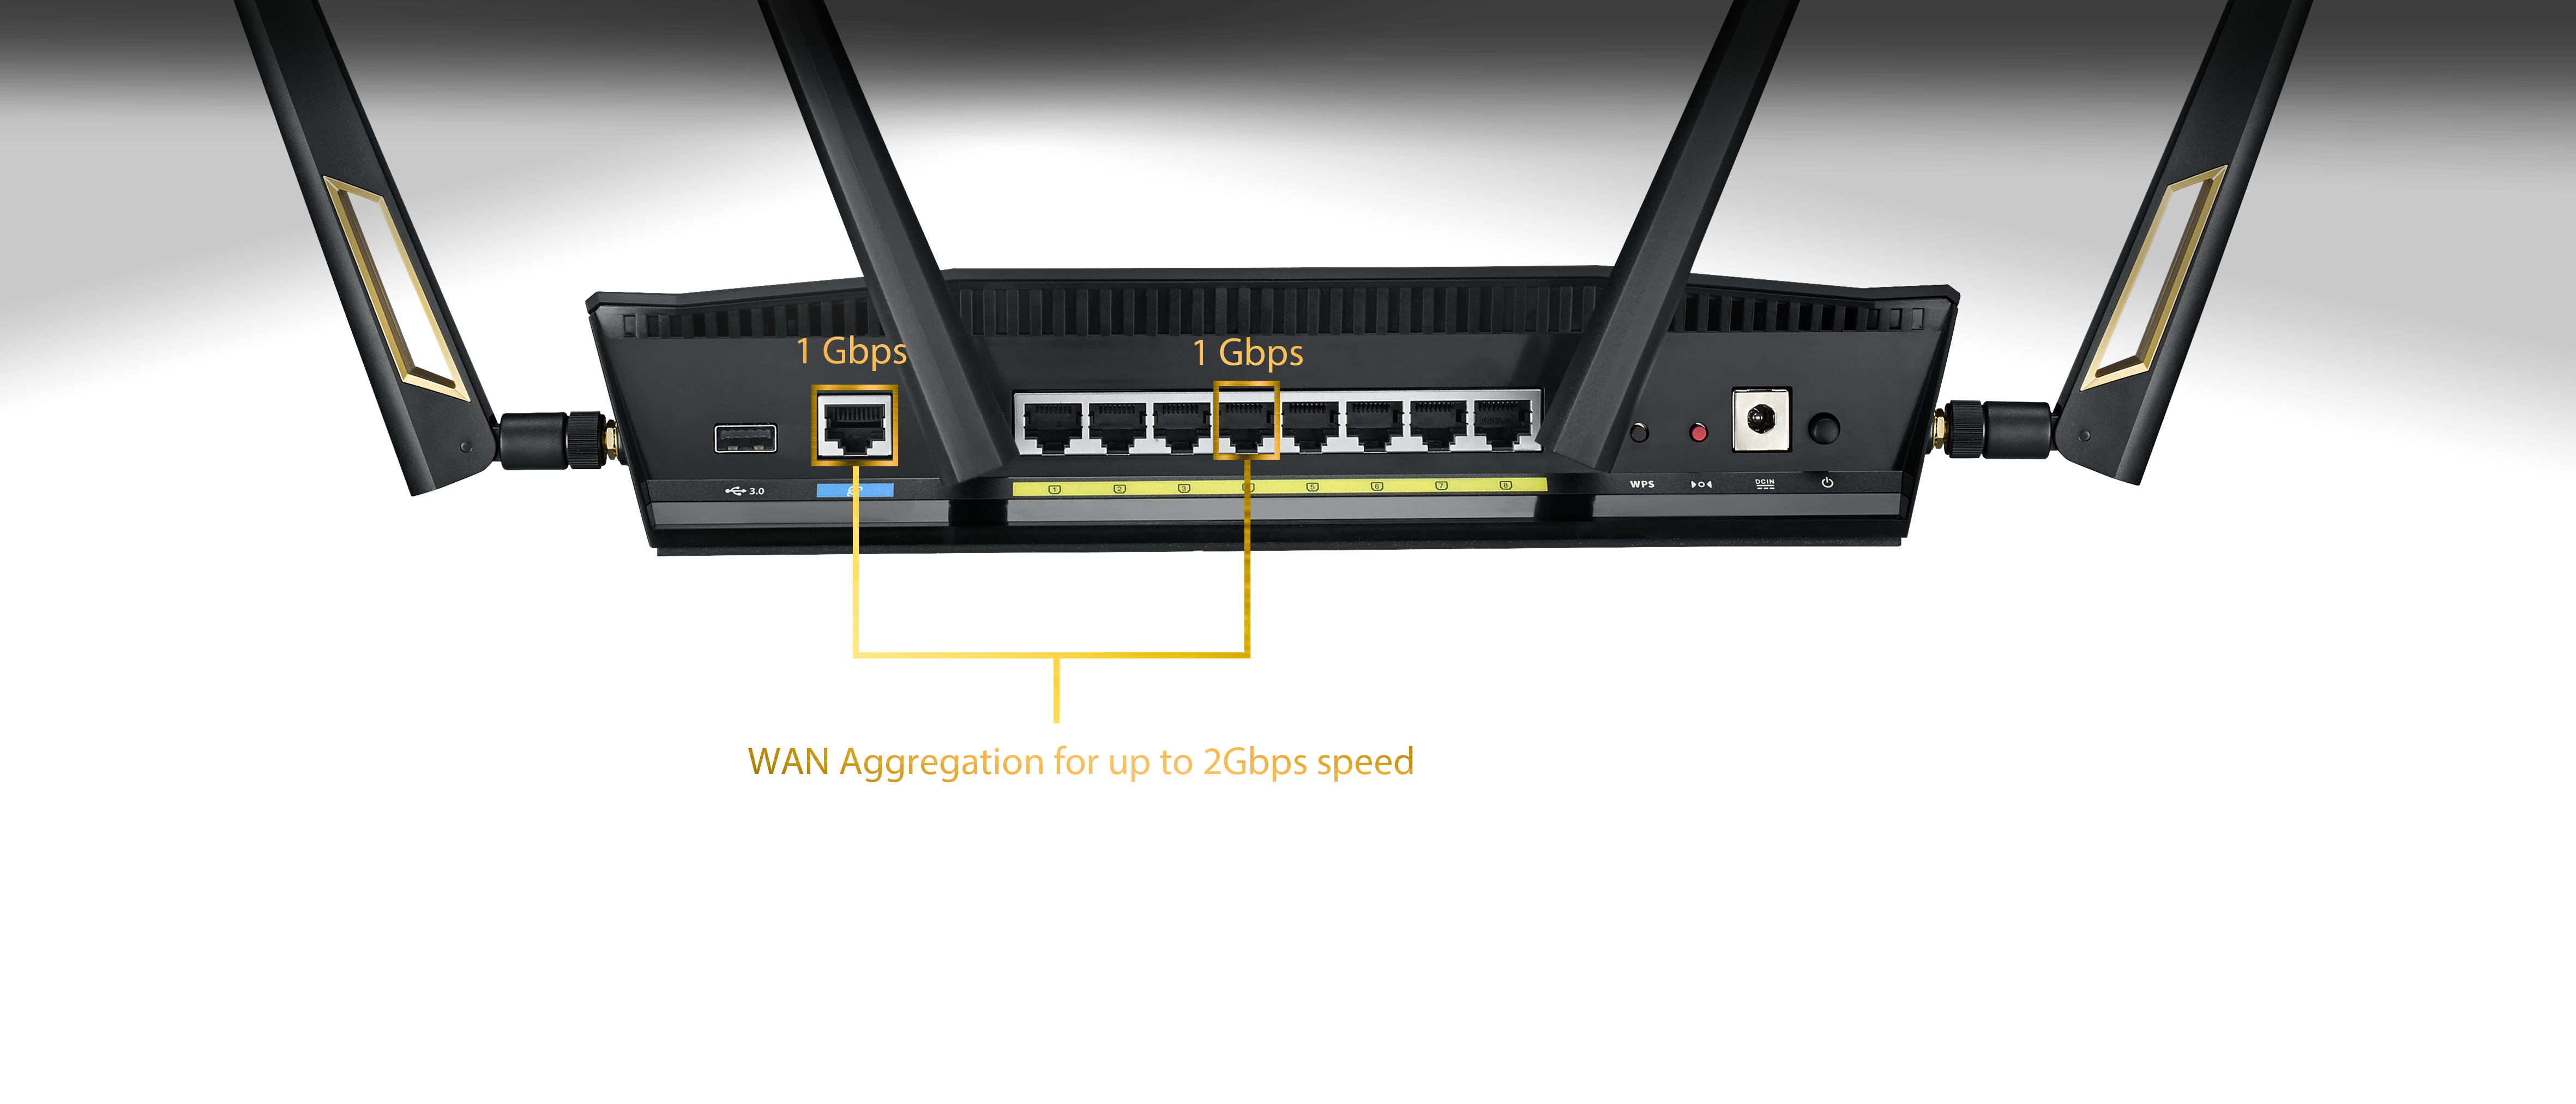 RT-AX88U｜WiFi Routers｜ASUS USA